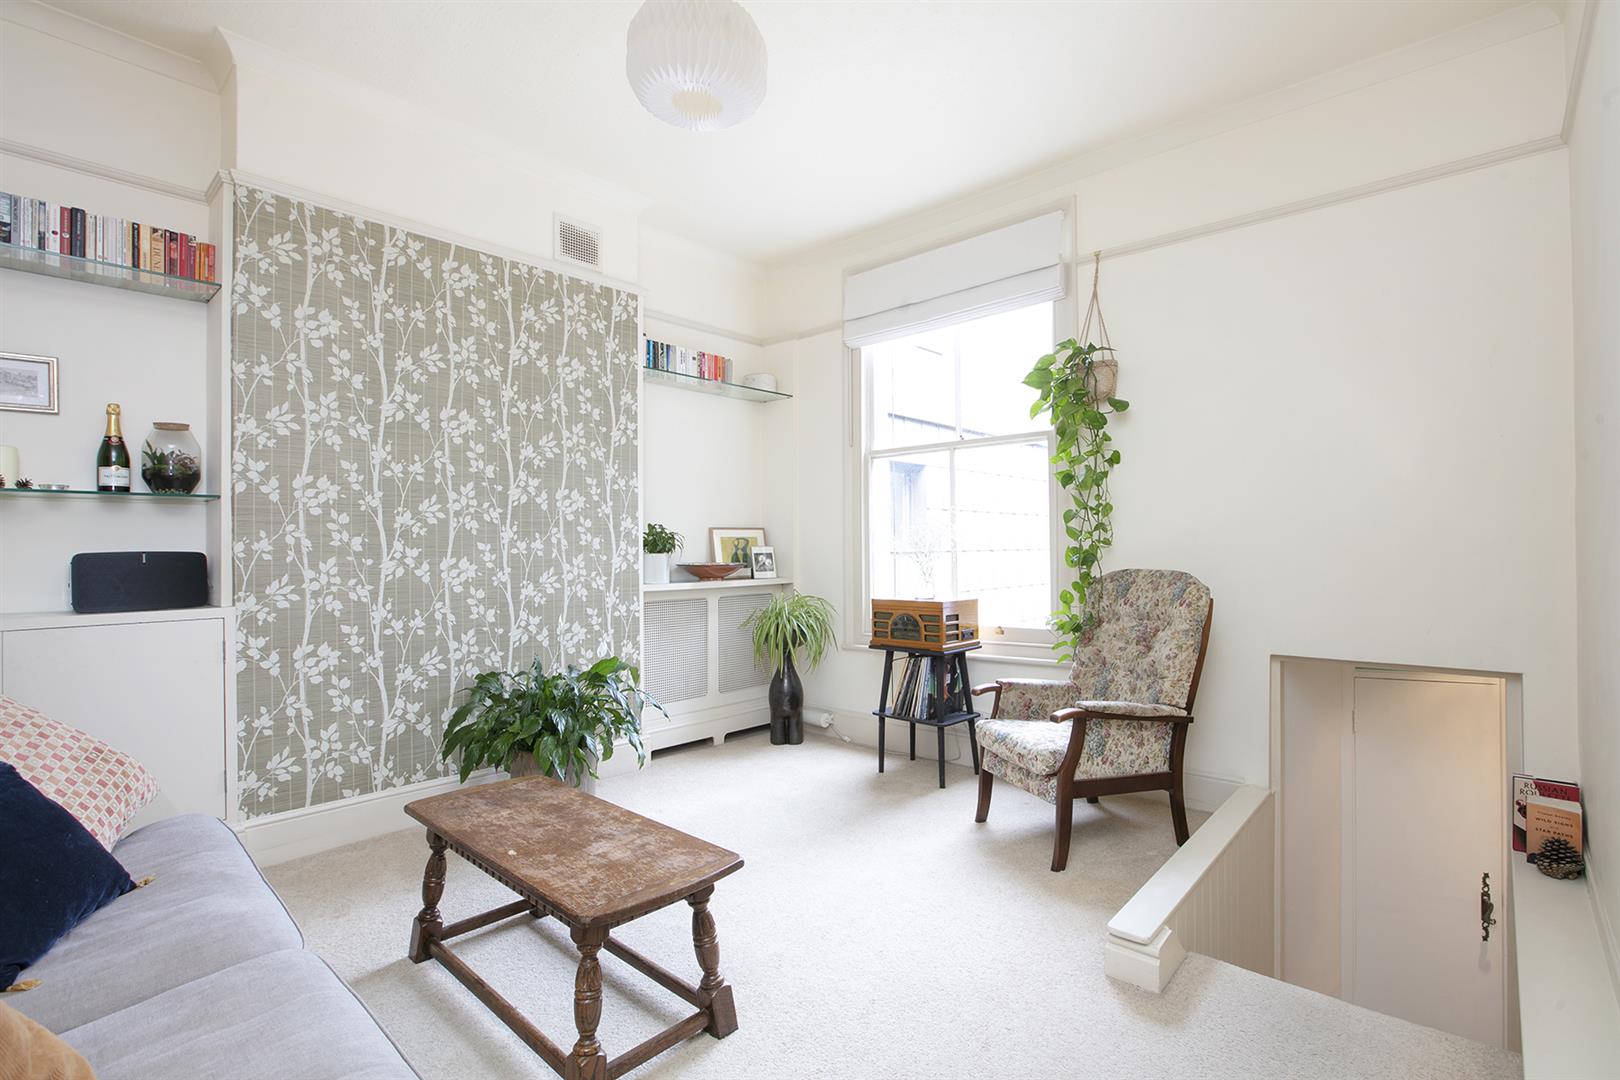 Flat - Conversion For Sale in Peckham Road, Camberwell, SE5 859 view2